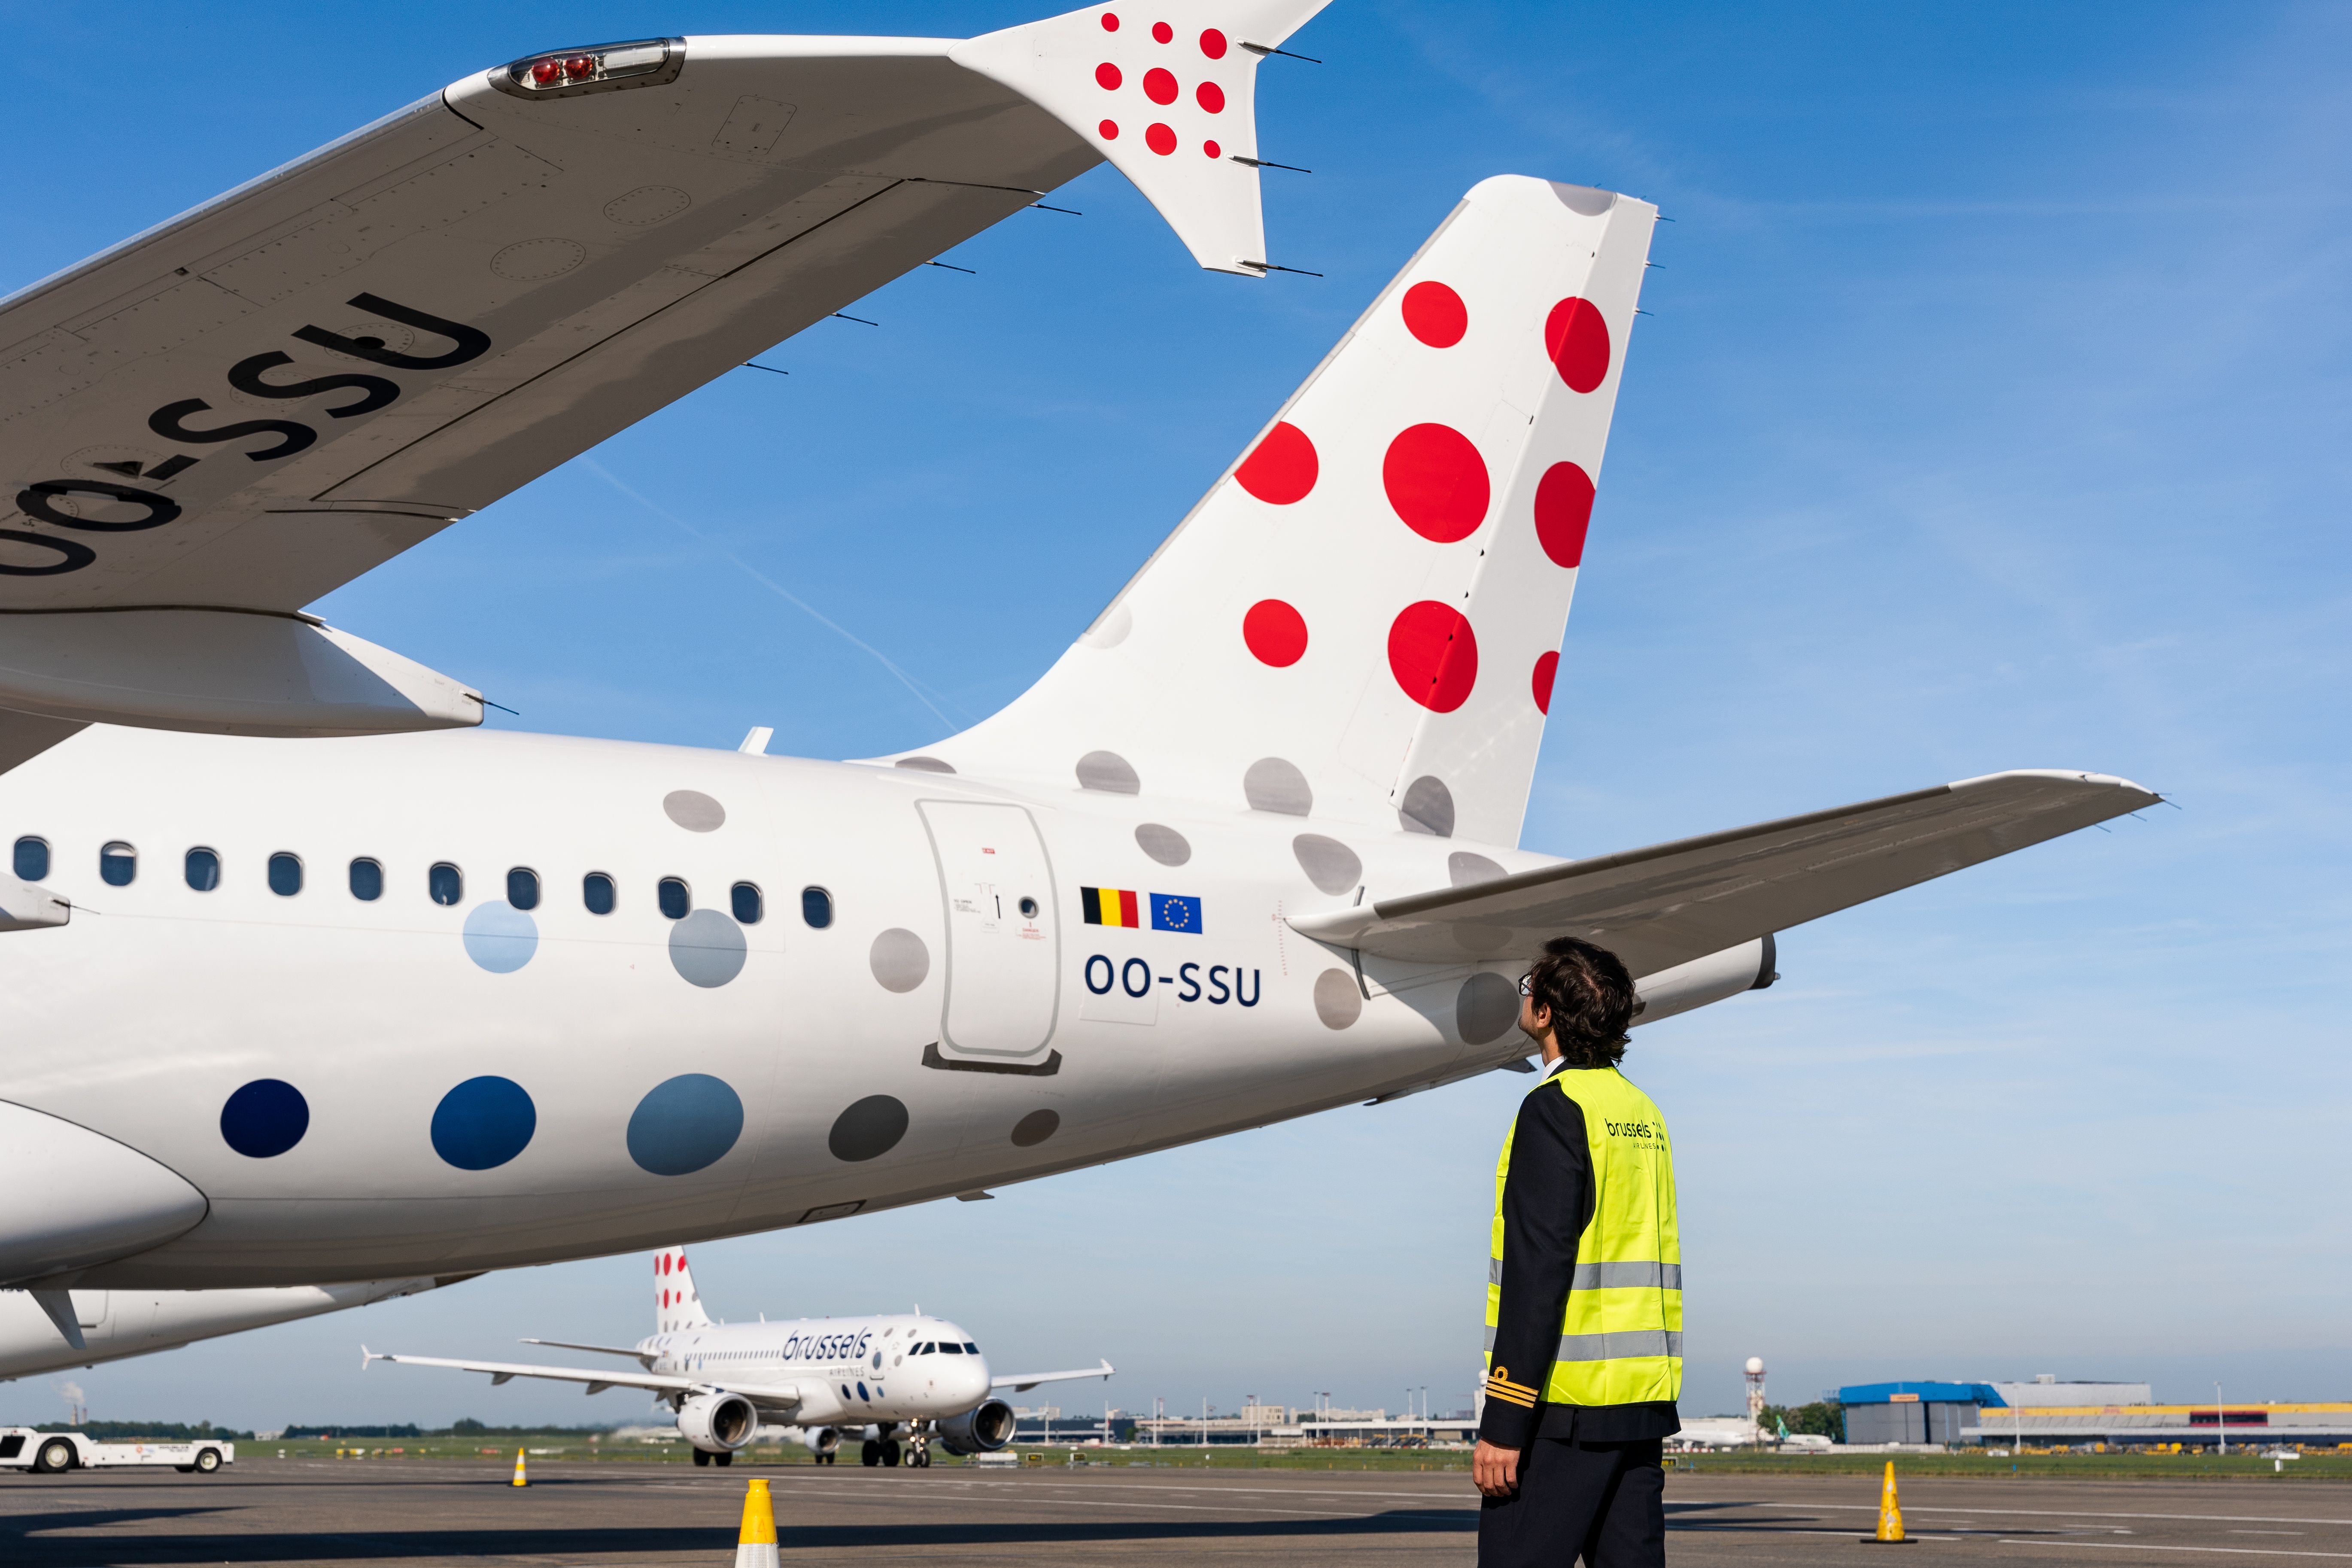 300+ Brussels Airlines Flights Canceled Due To Strike Action This Week